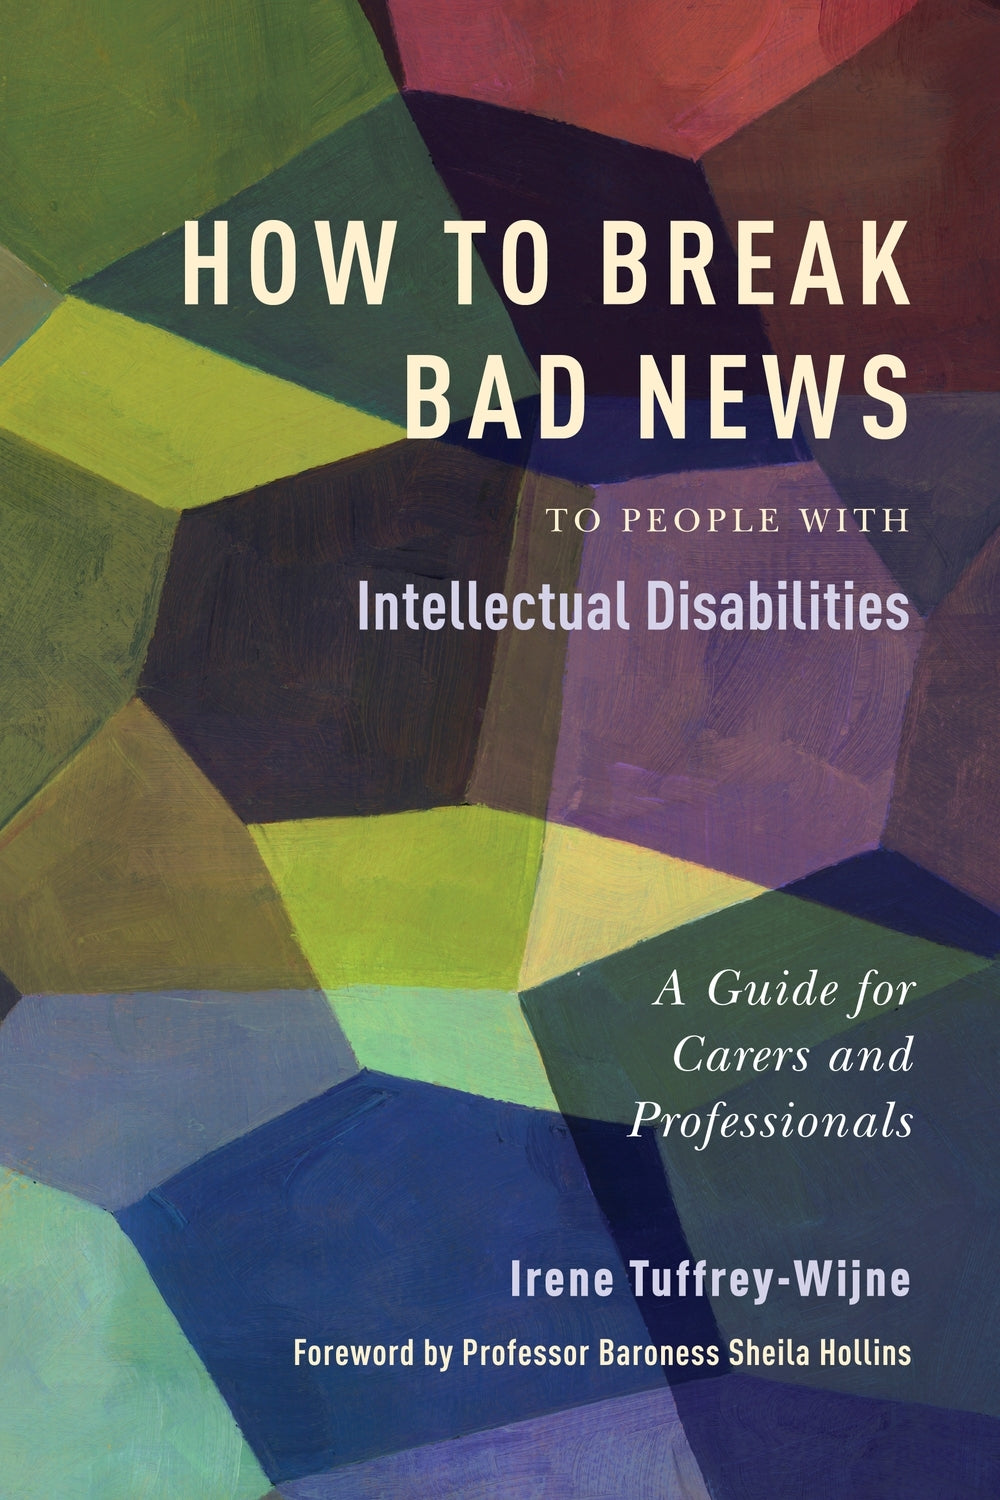 How to Break Bad News to People with Intellectual Disabilities by Irene Tuffrey-Wijne, Sheila Hollins